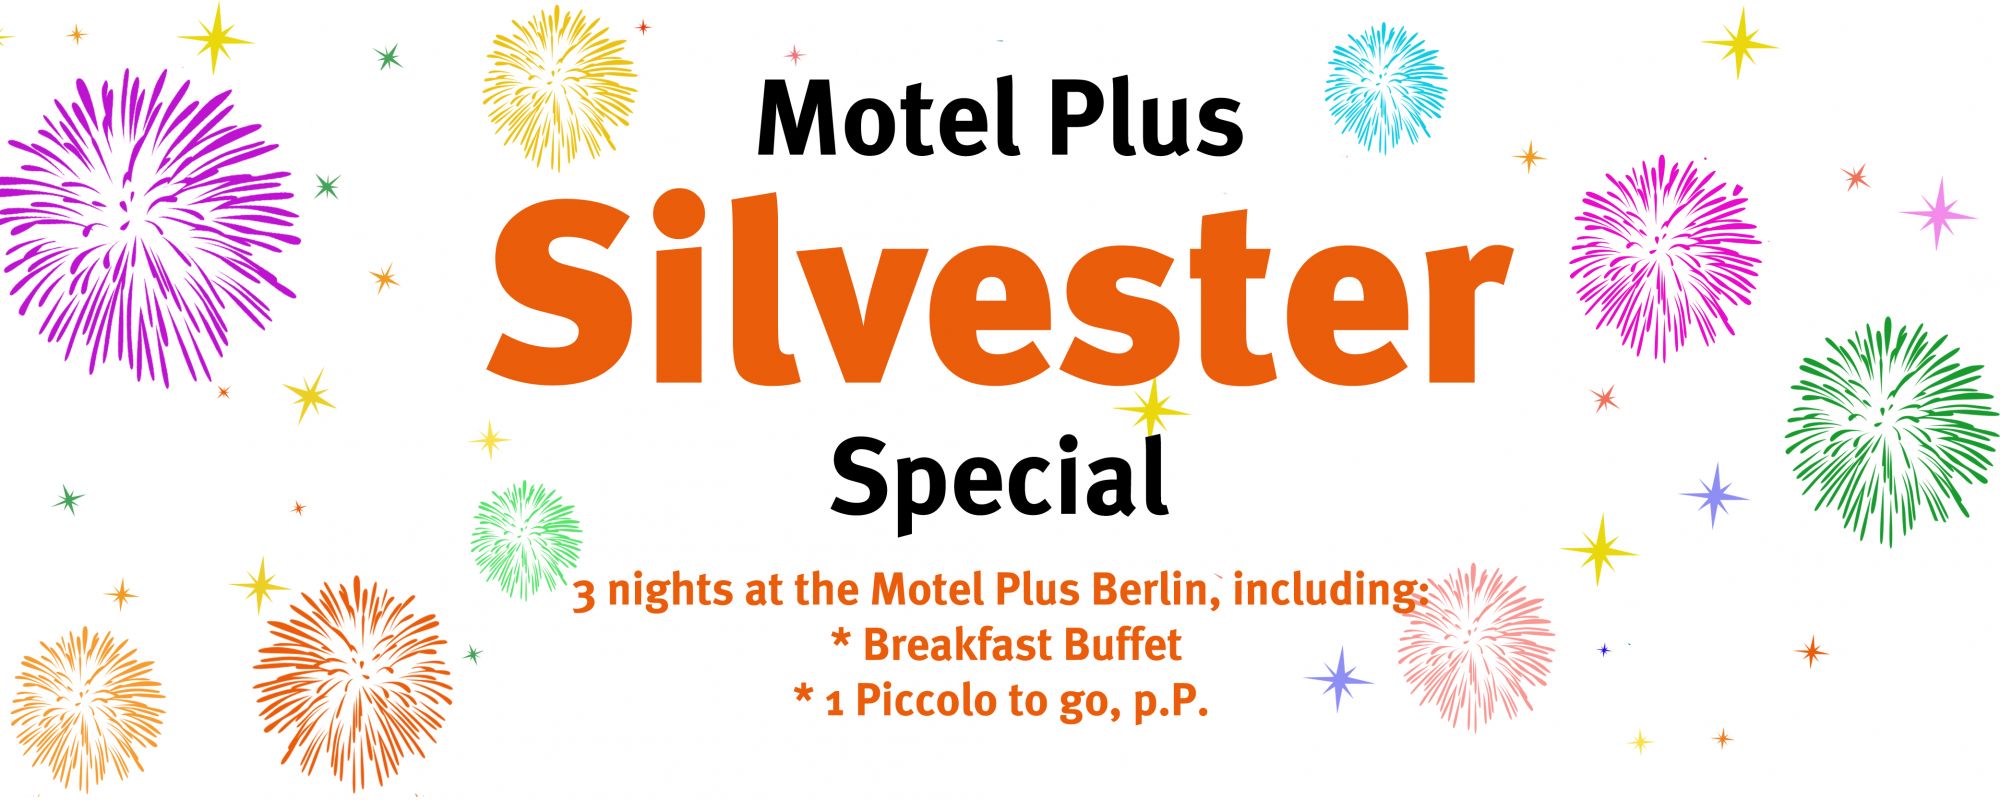 Silvester Special Motel Plus